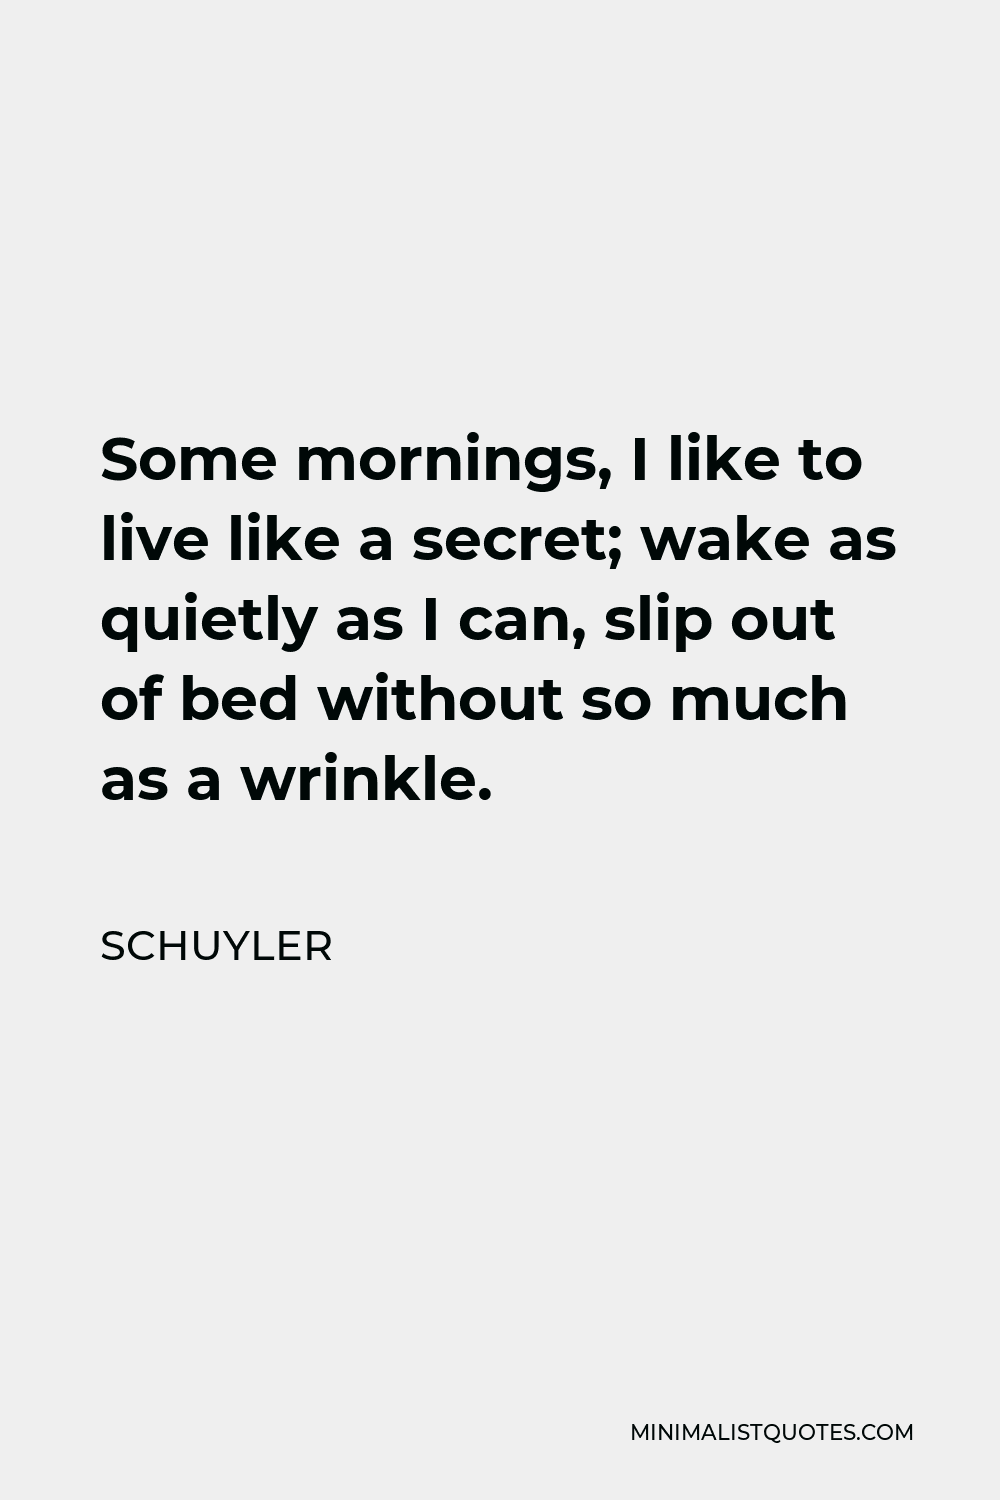 Schuyler Quote - Some mornings, I like to live like a secret; wake as quietly as I can, slip out of bed without so much as a wrinkle.